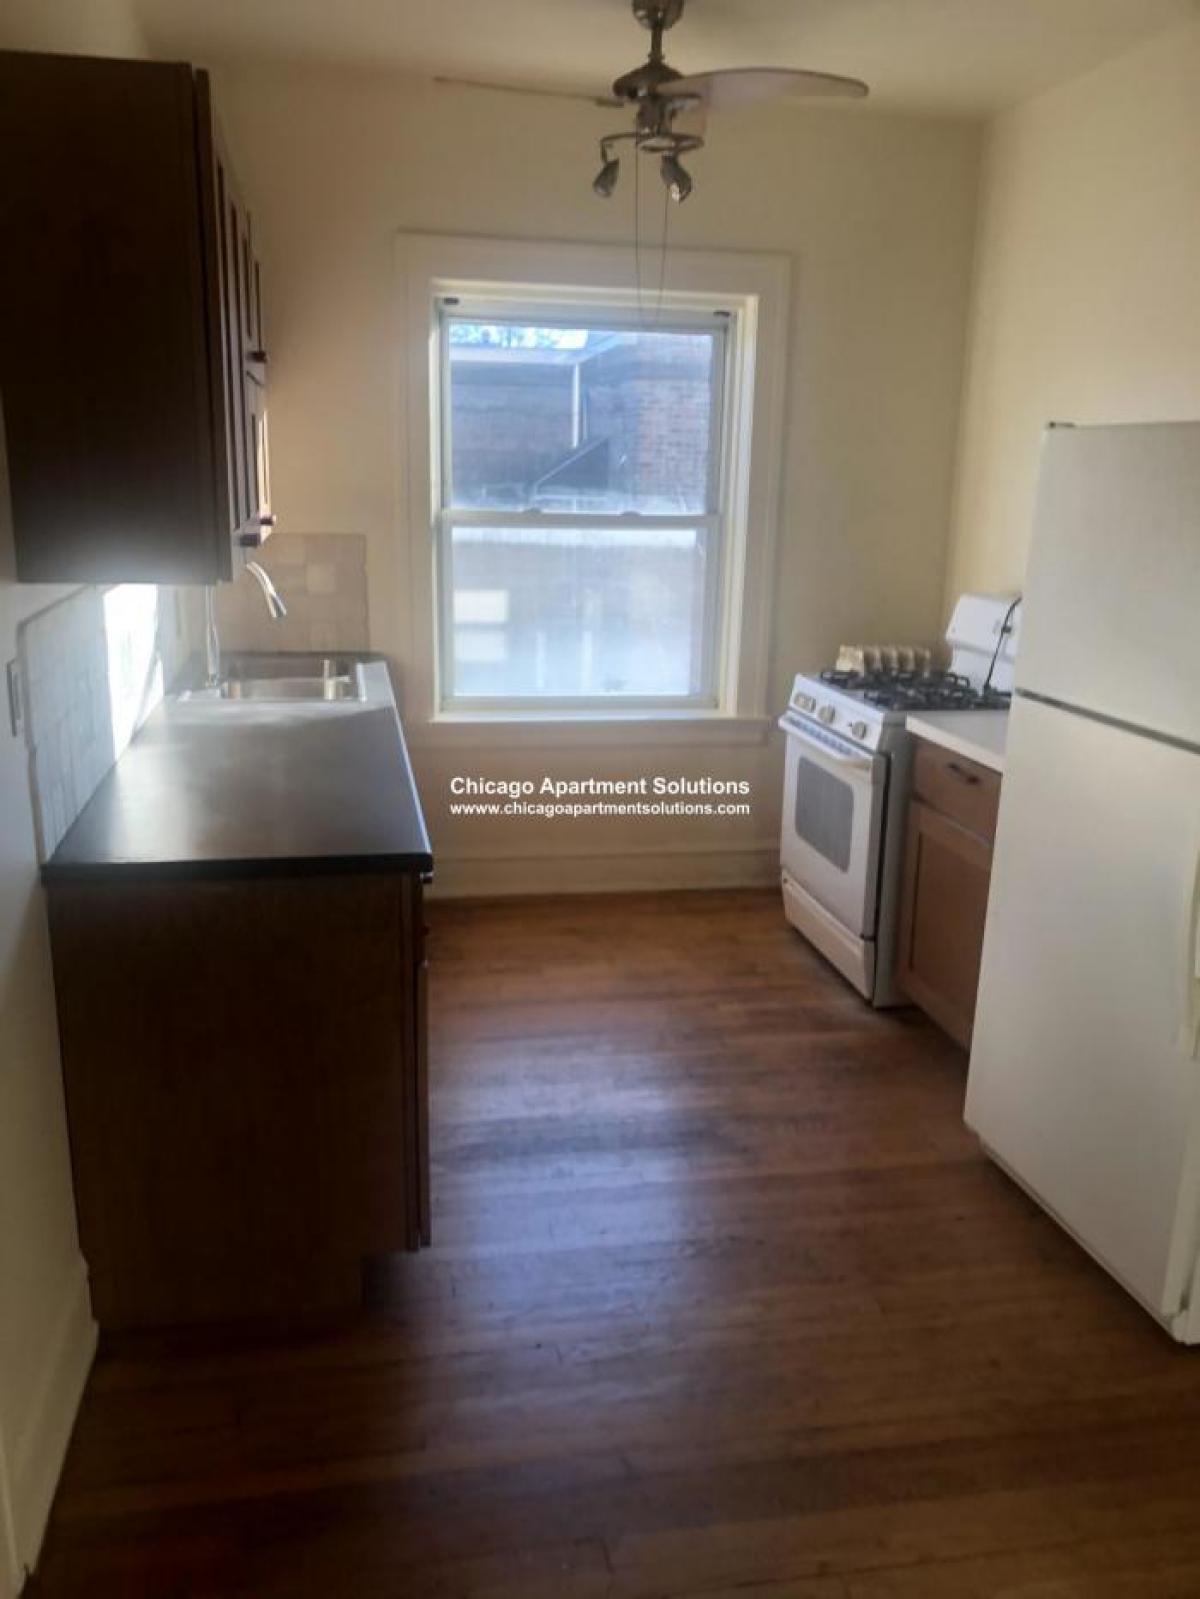 Picture of Condo For Rent in Oak Park, Illinois, United States